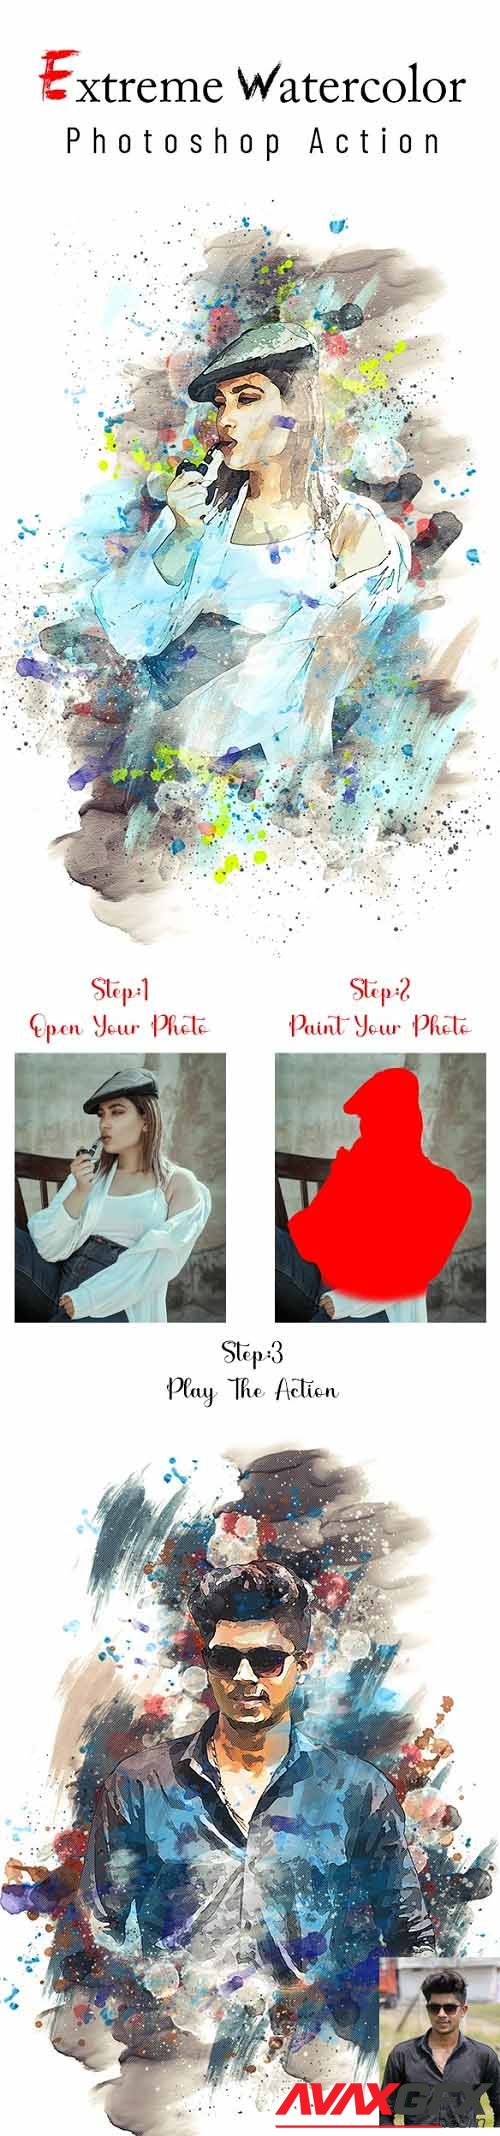 Extreme Watercolor Photoshop Action - 36751605